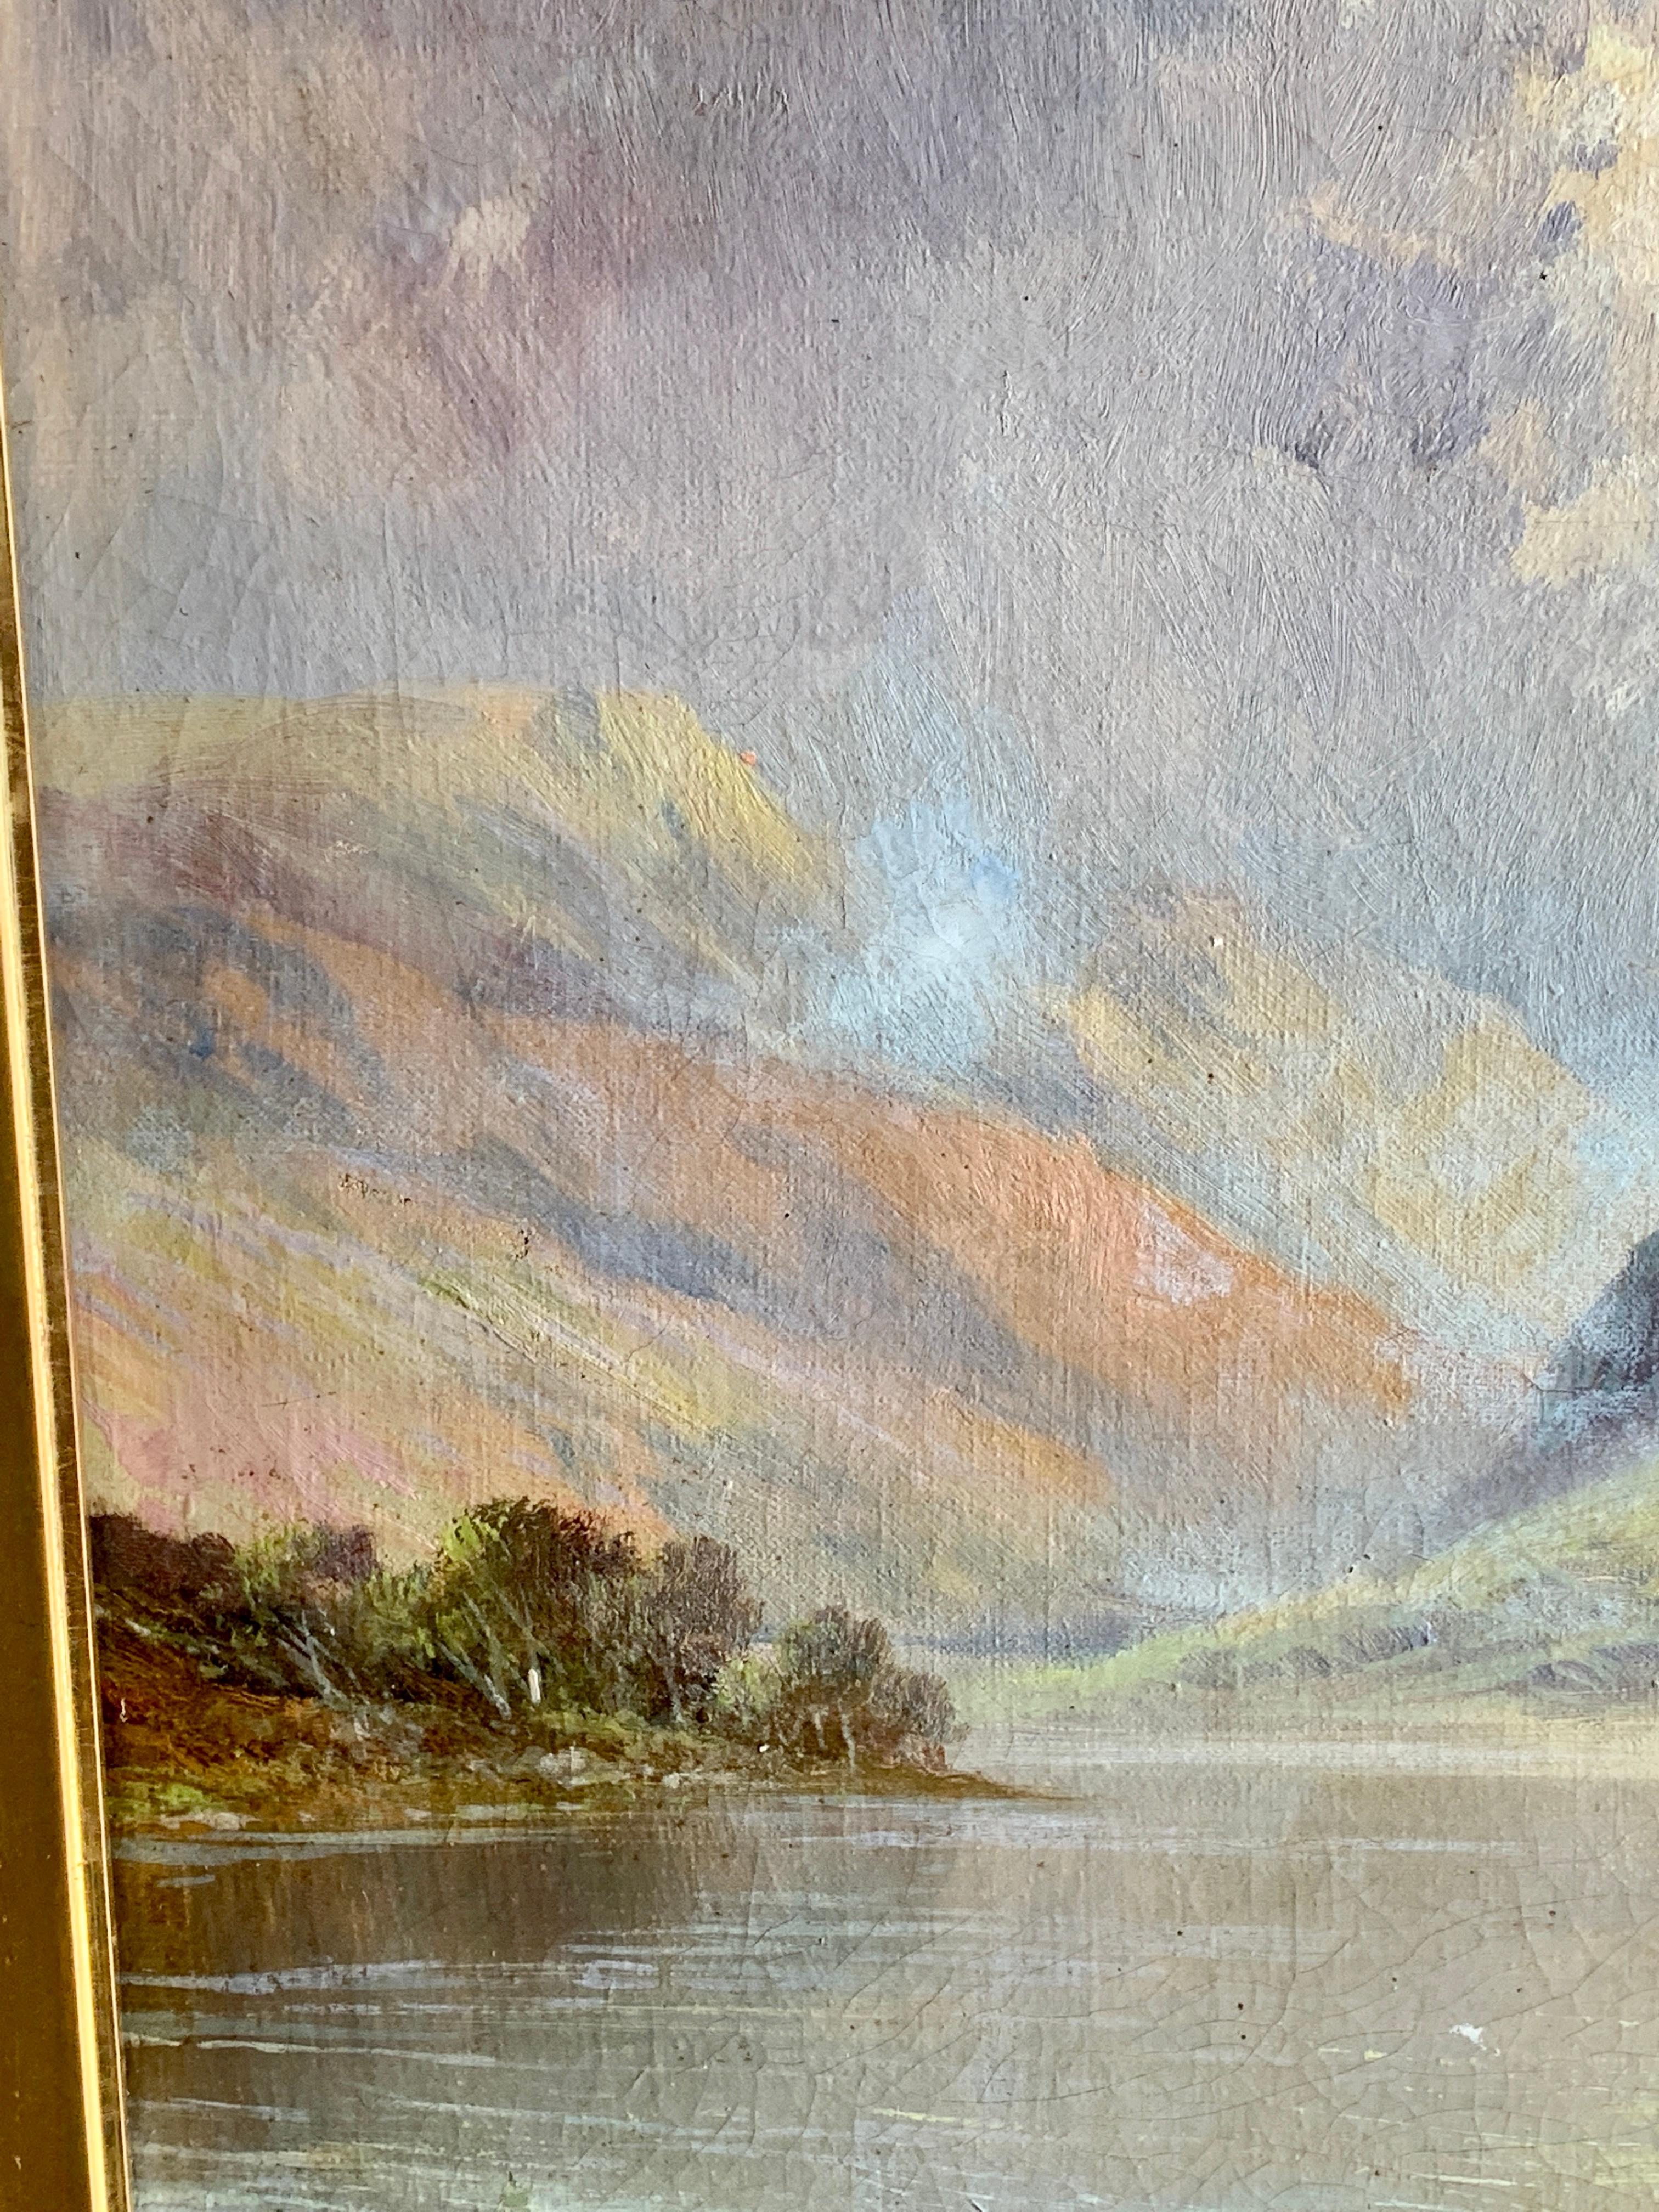 Antique Scottish Highland Loch landscape, with sunlit streaming onto the water - Gray Landscape Painting by Francis E. Jamieson